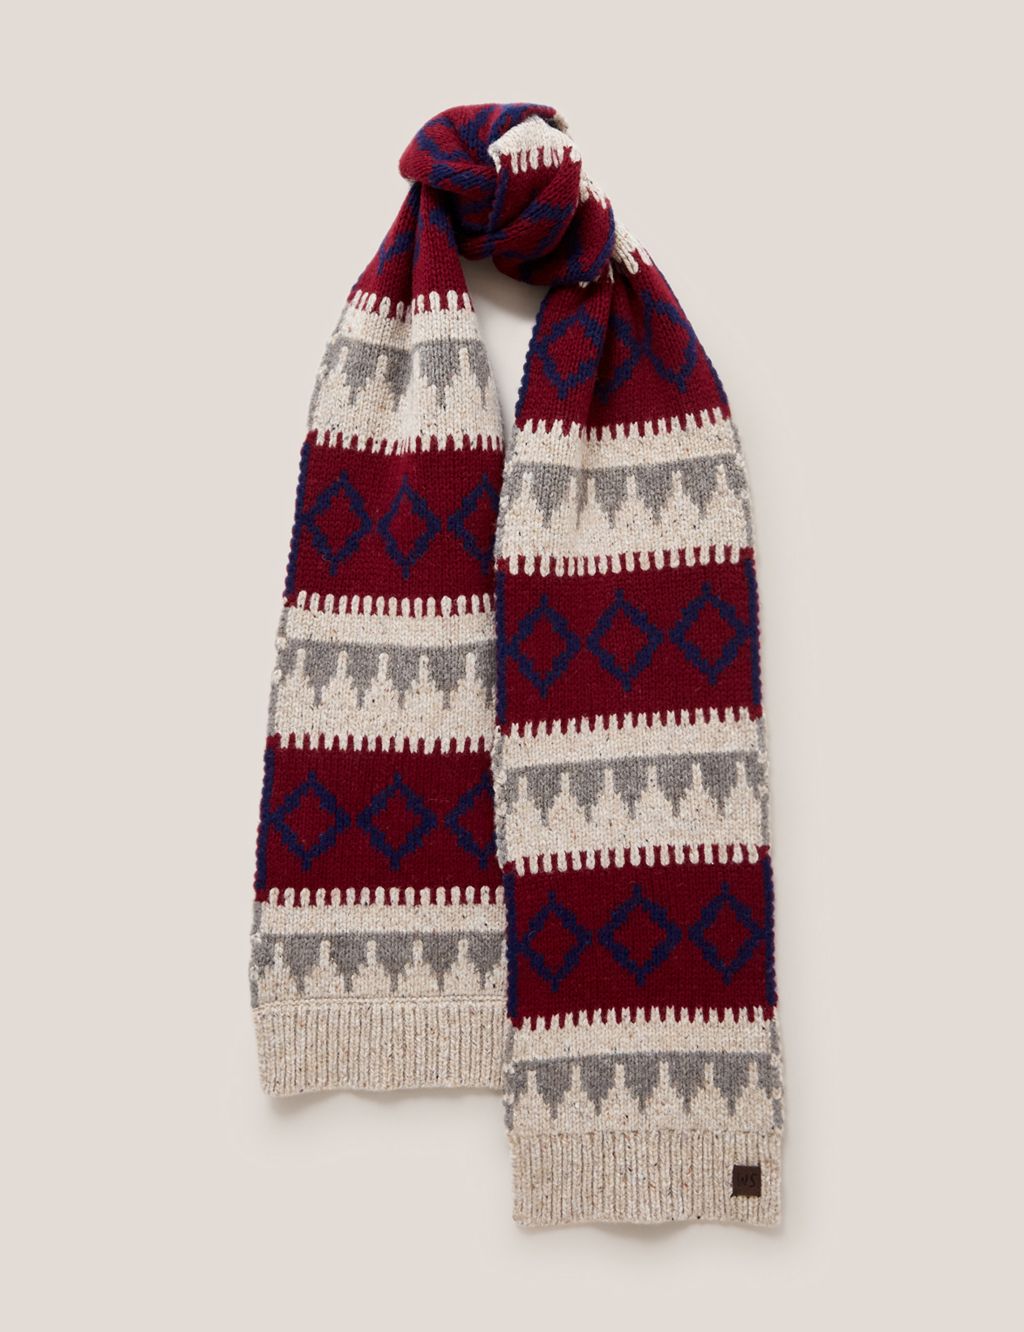 Wool Rich Fair Isle Knitted Scarf image 1